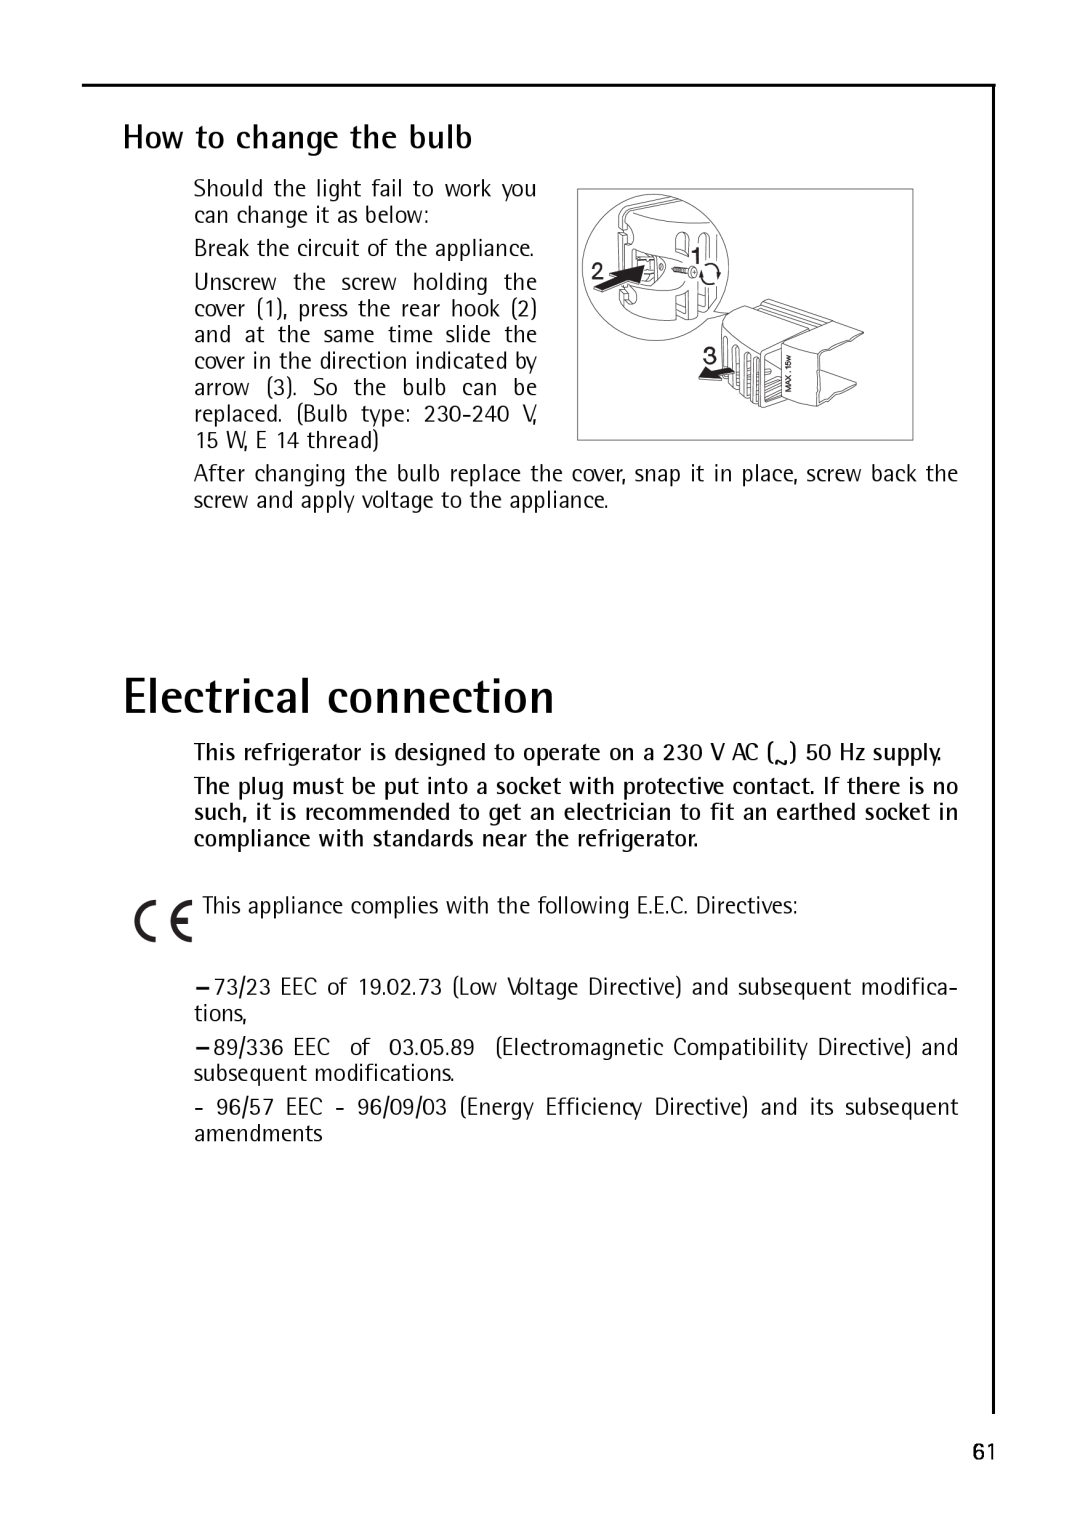 AEG S 75348 KG, S75348 KG8, S 75388 KG8 manual Electrical connection, How to change the bulb 